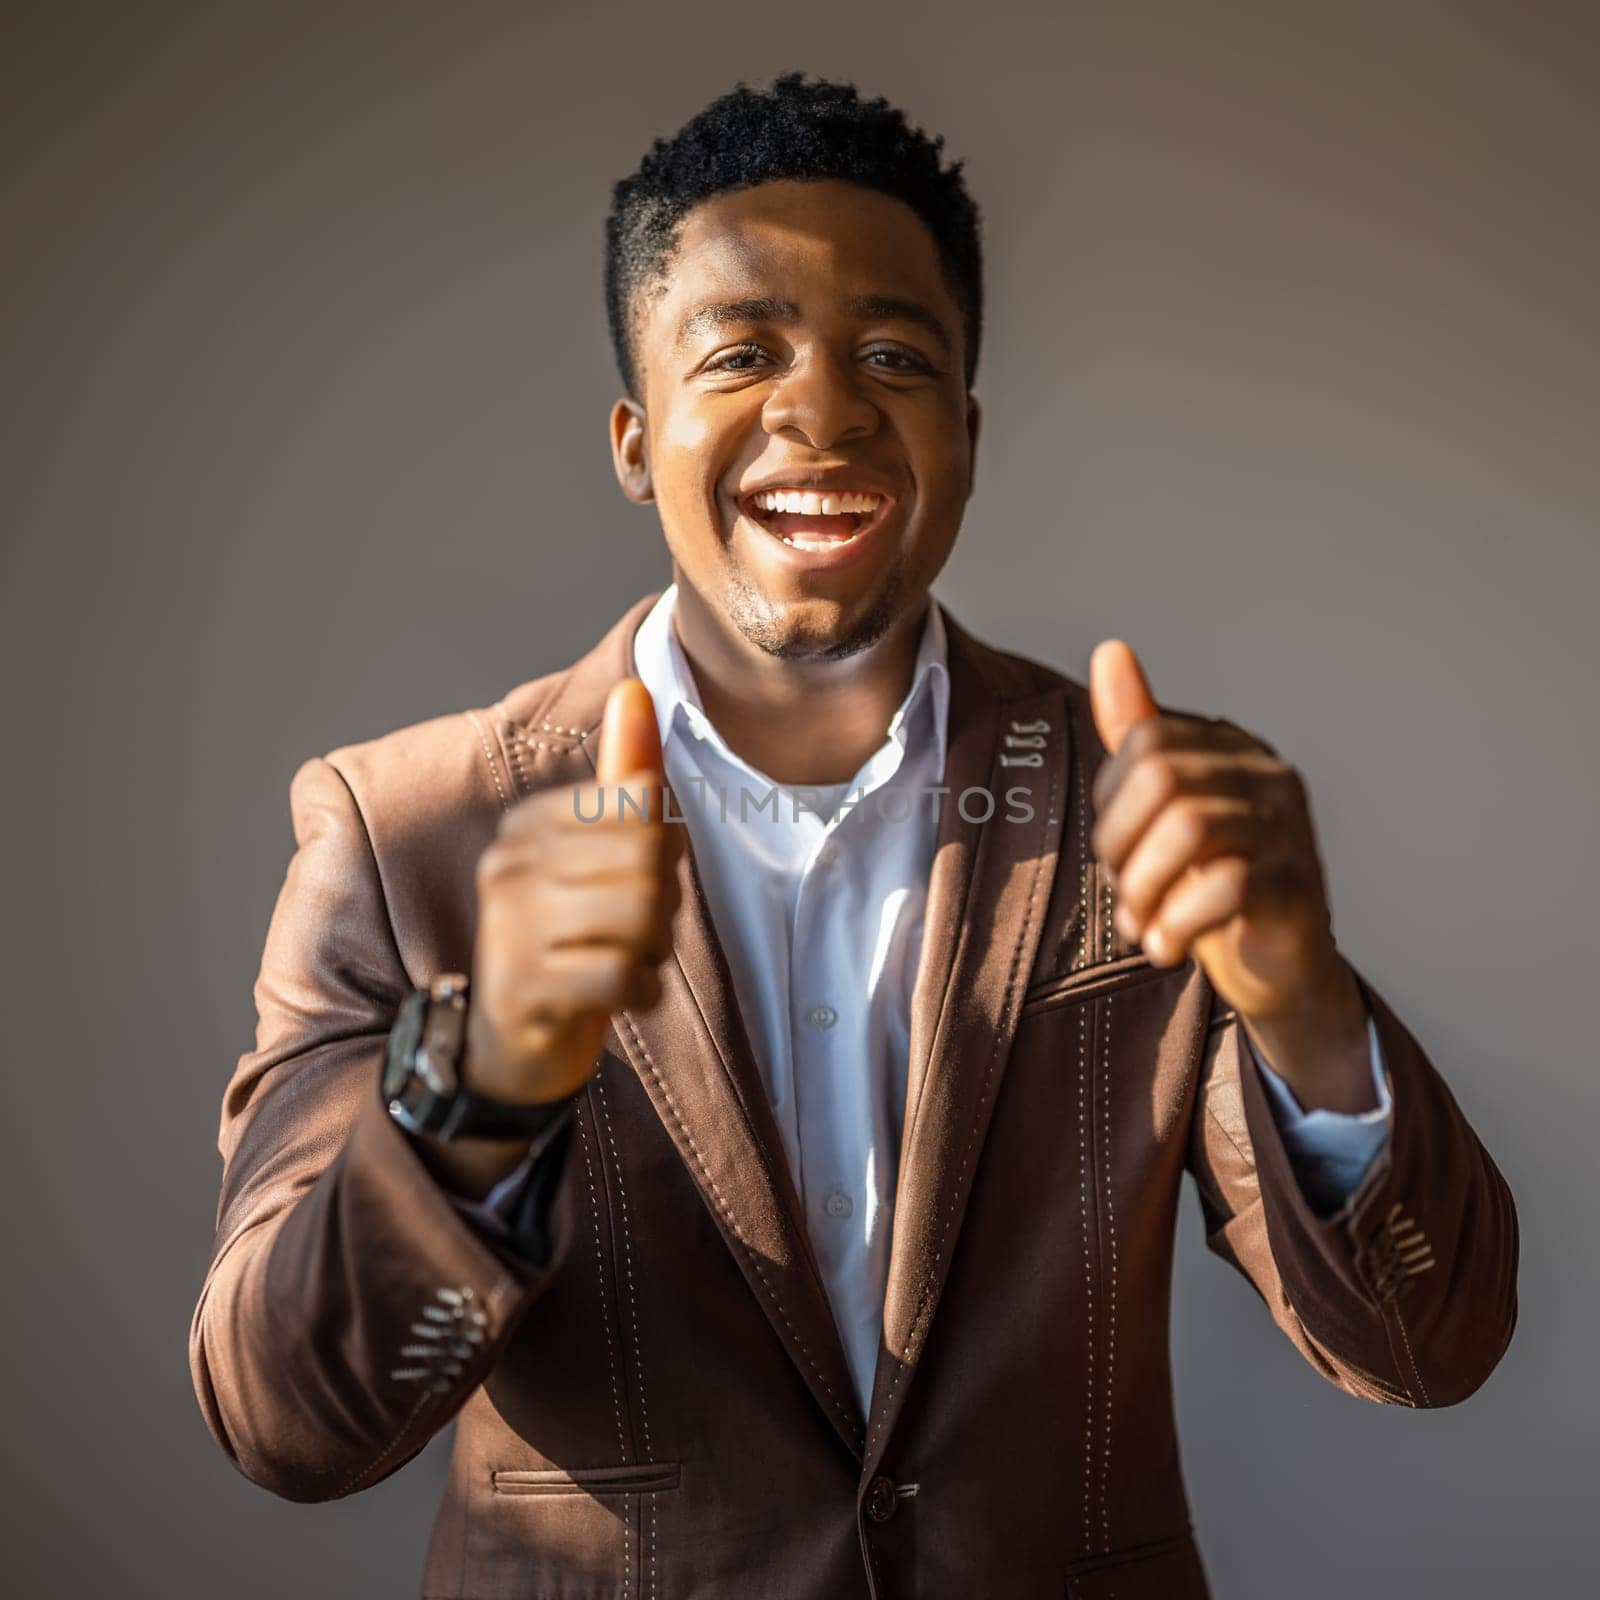 Portrait of happy businessman who is smiling and showing thumbs up.